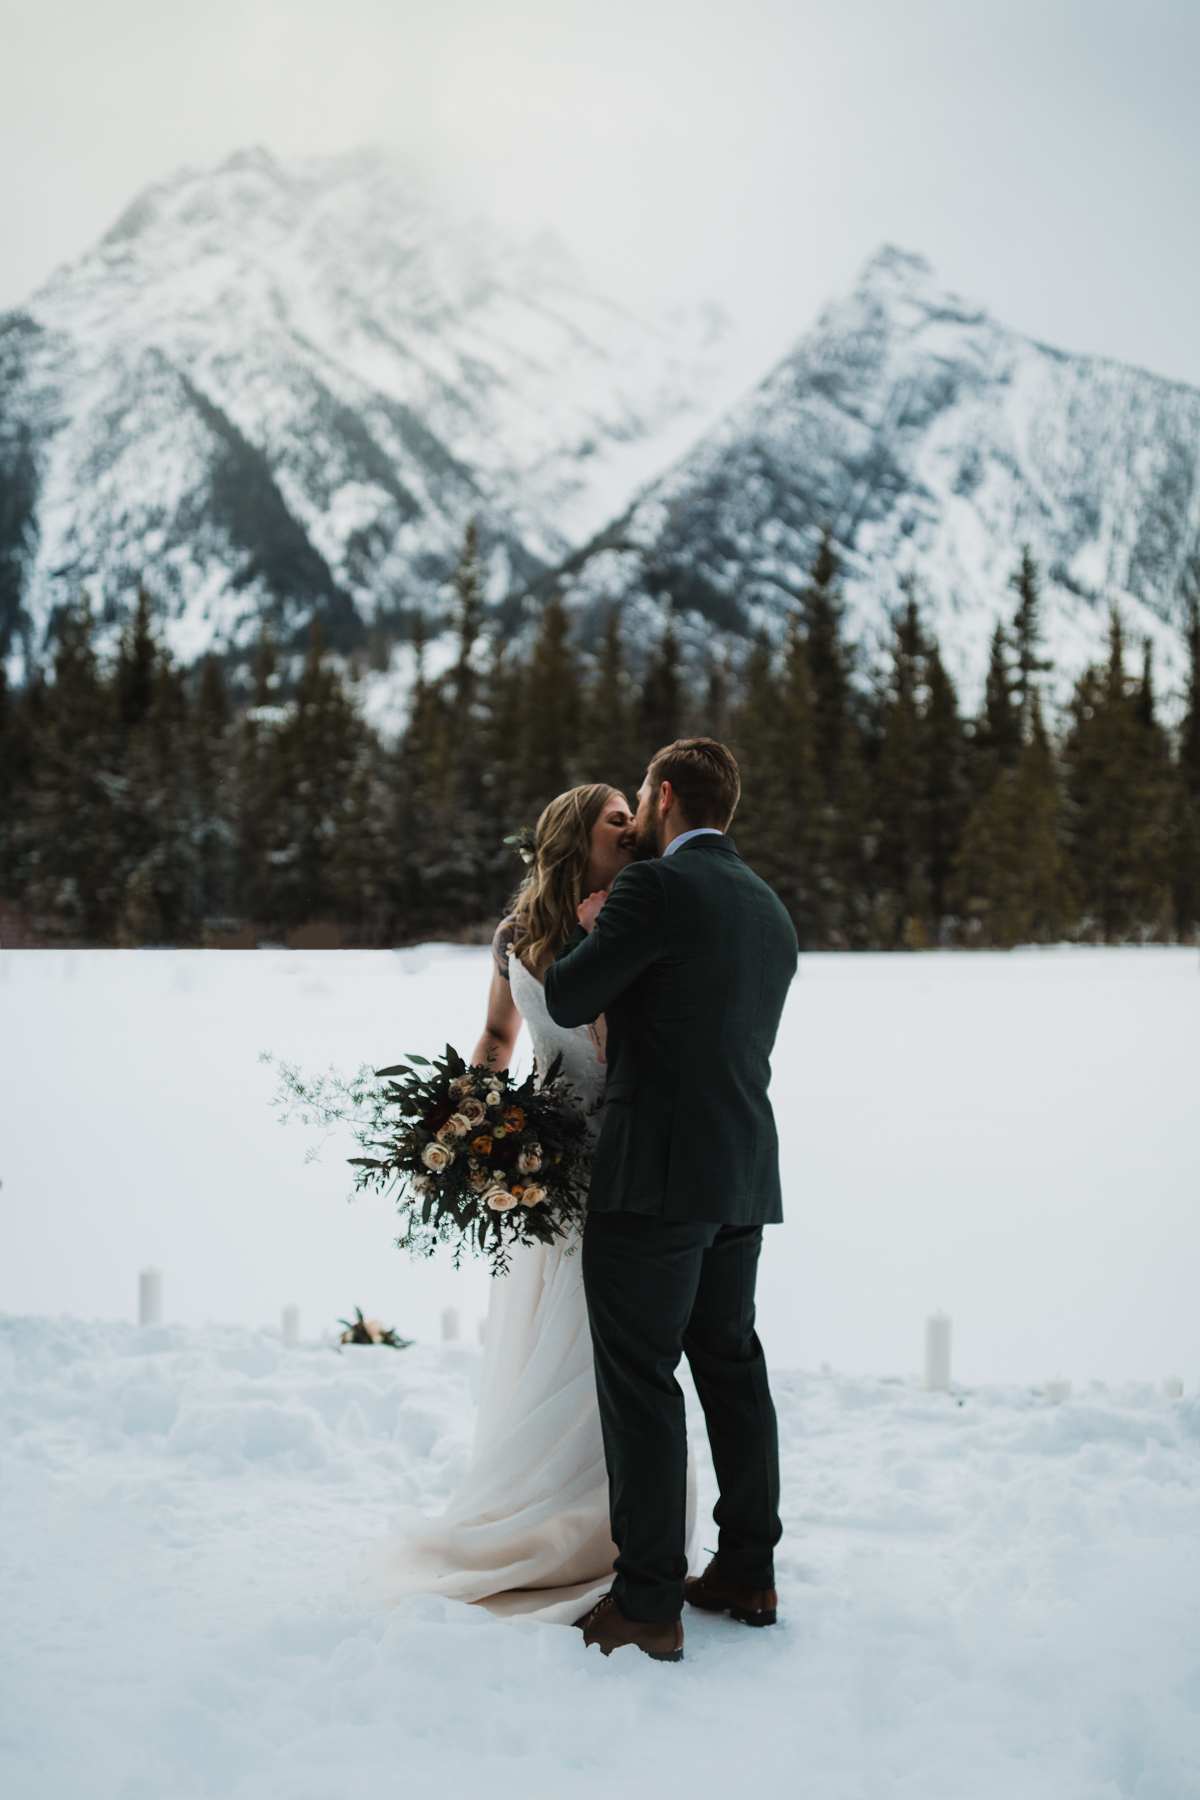 Canmore Elopement Photographer in the Canadian Rockies - Image 38